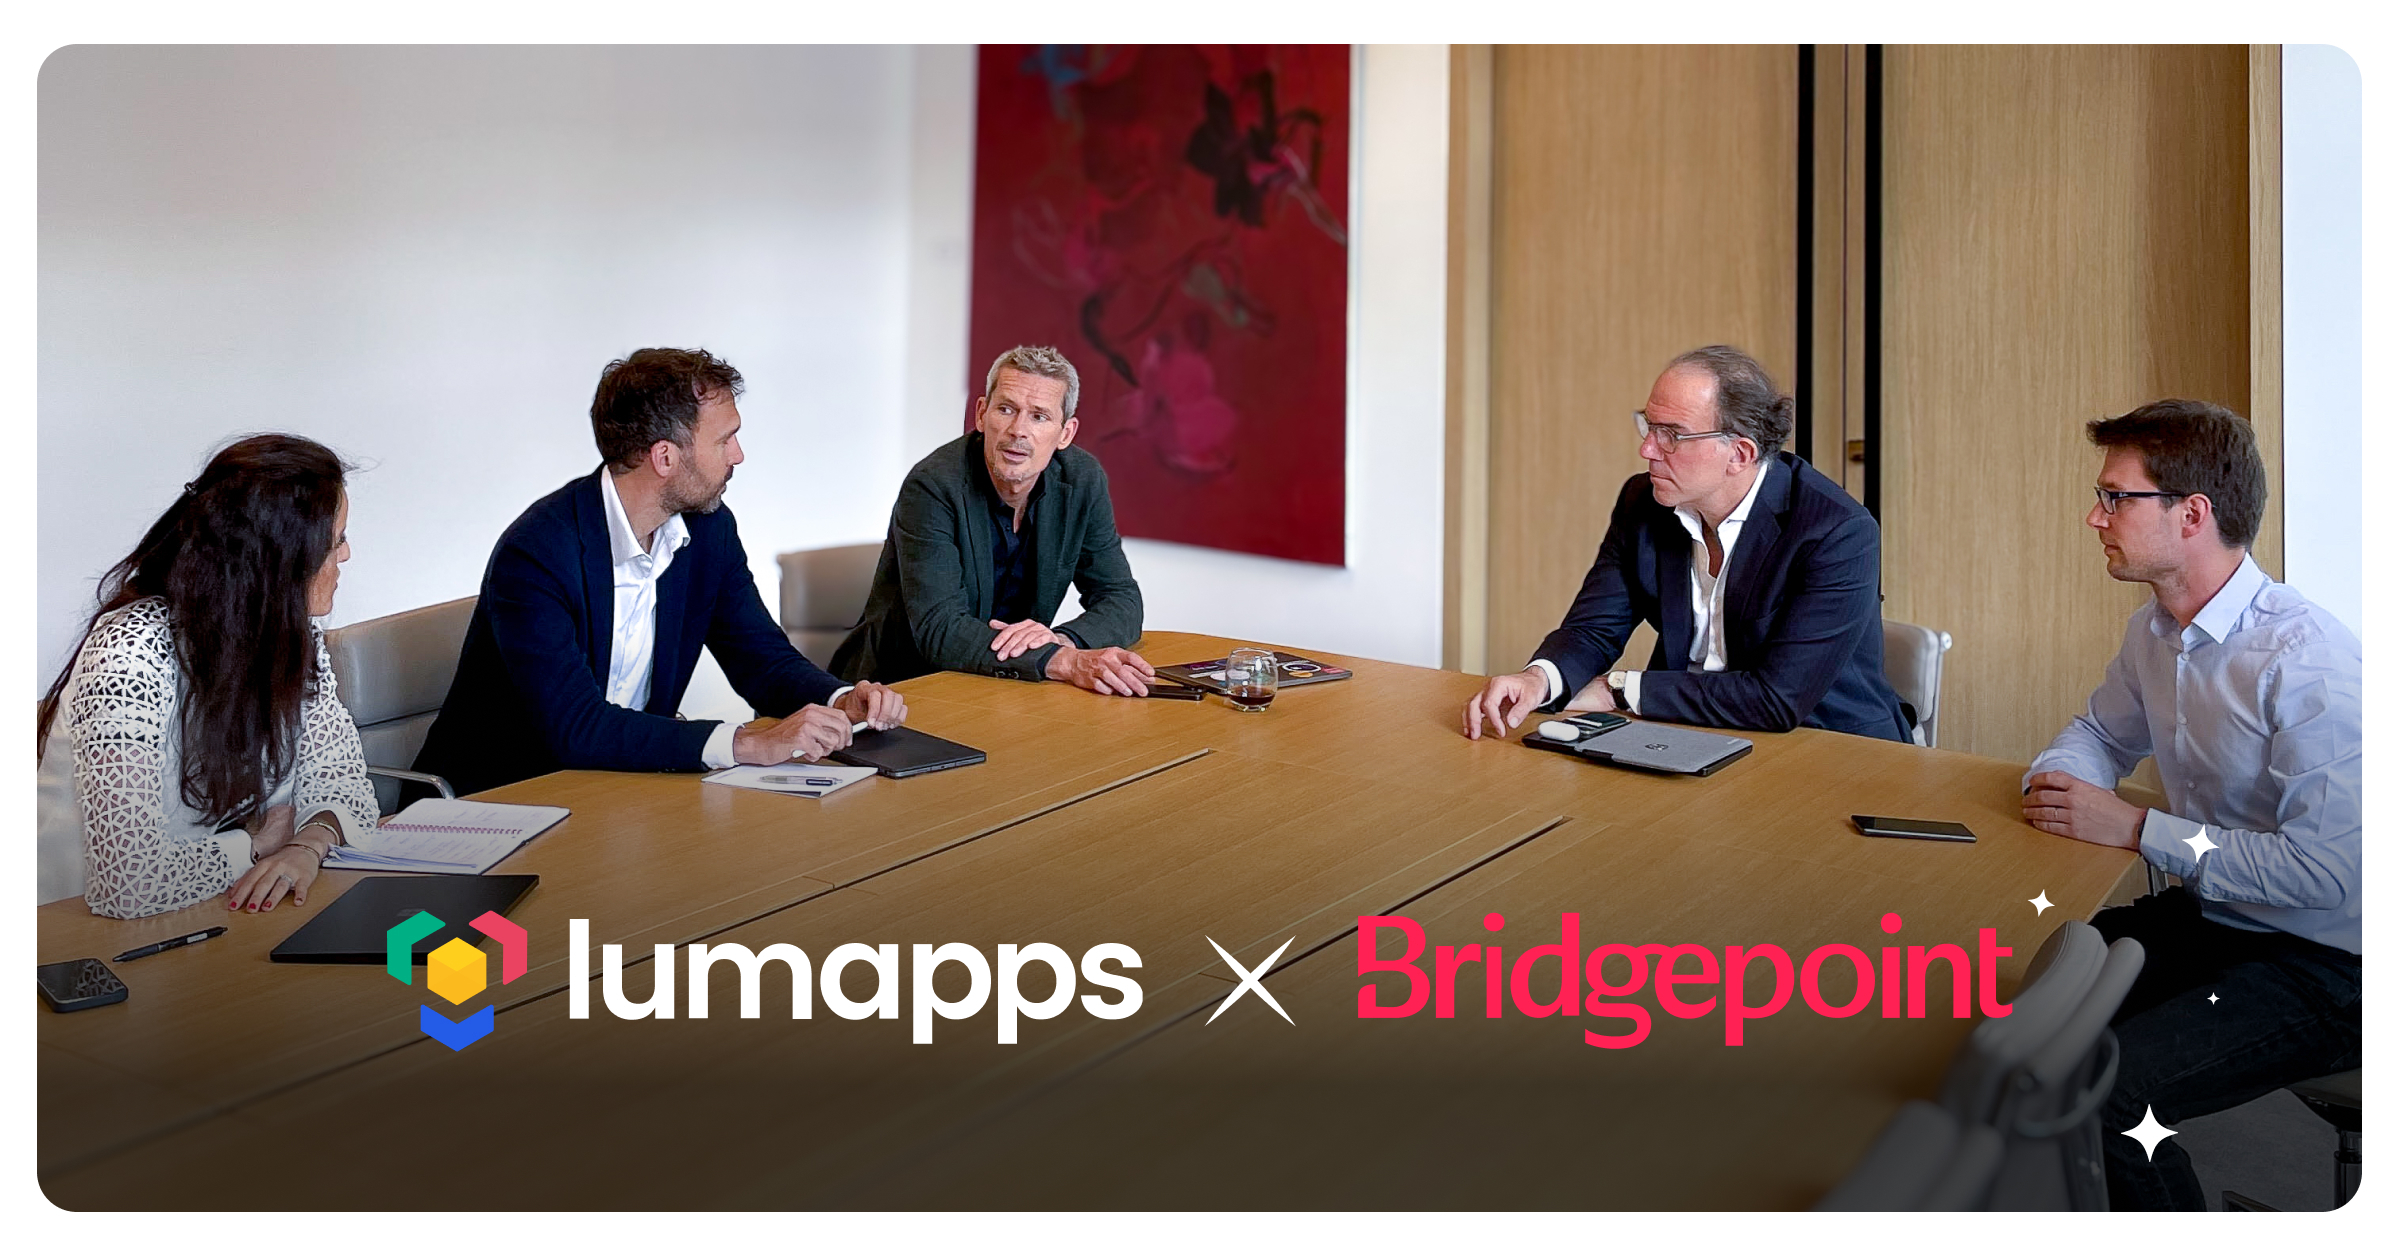 LumApps and Bridgepoint announce the official closing of Bridgepoint’s investment in next-generation intranet LumApps